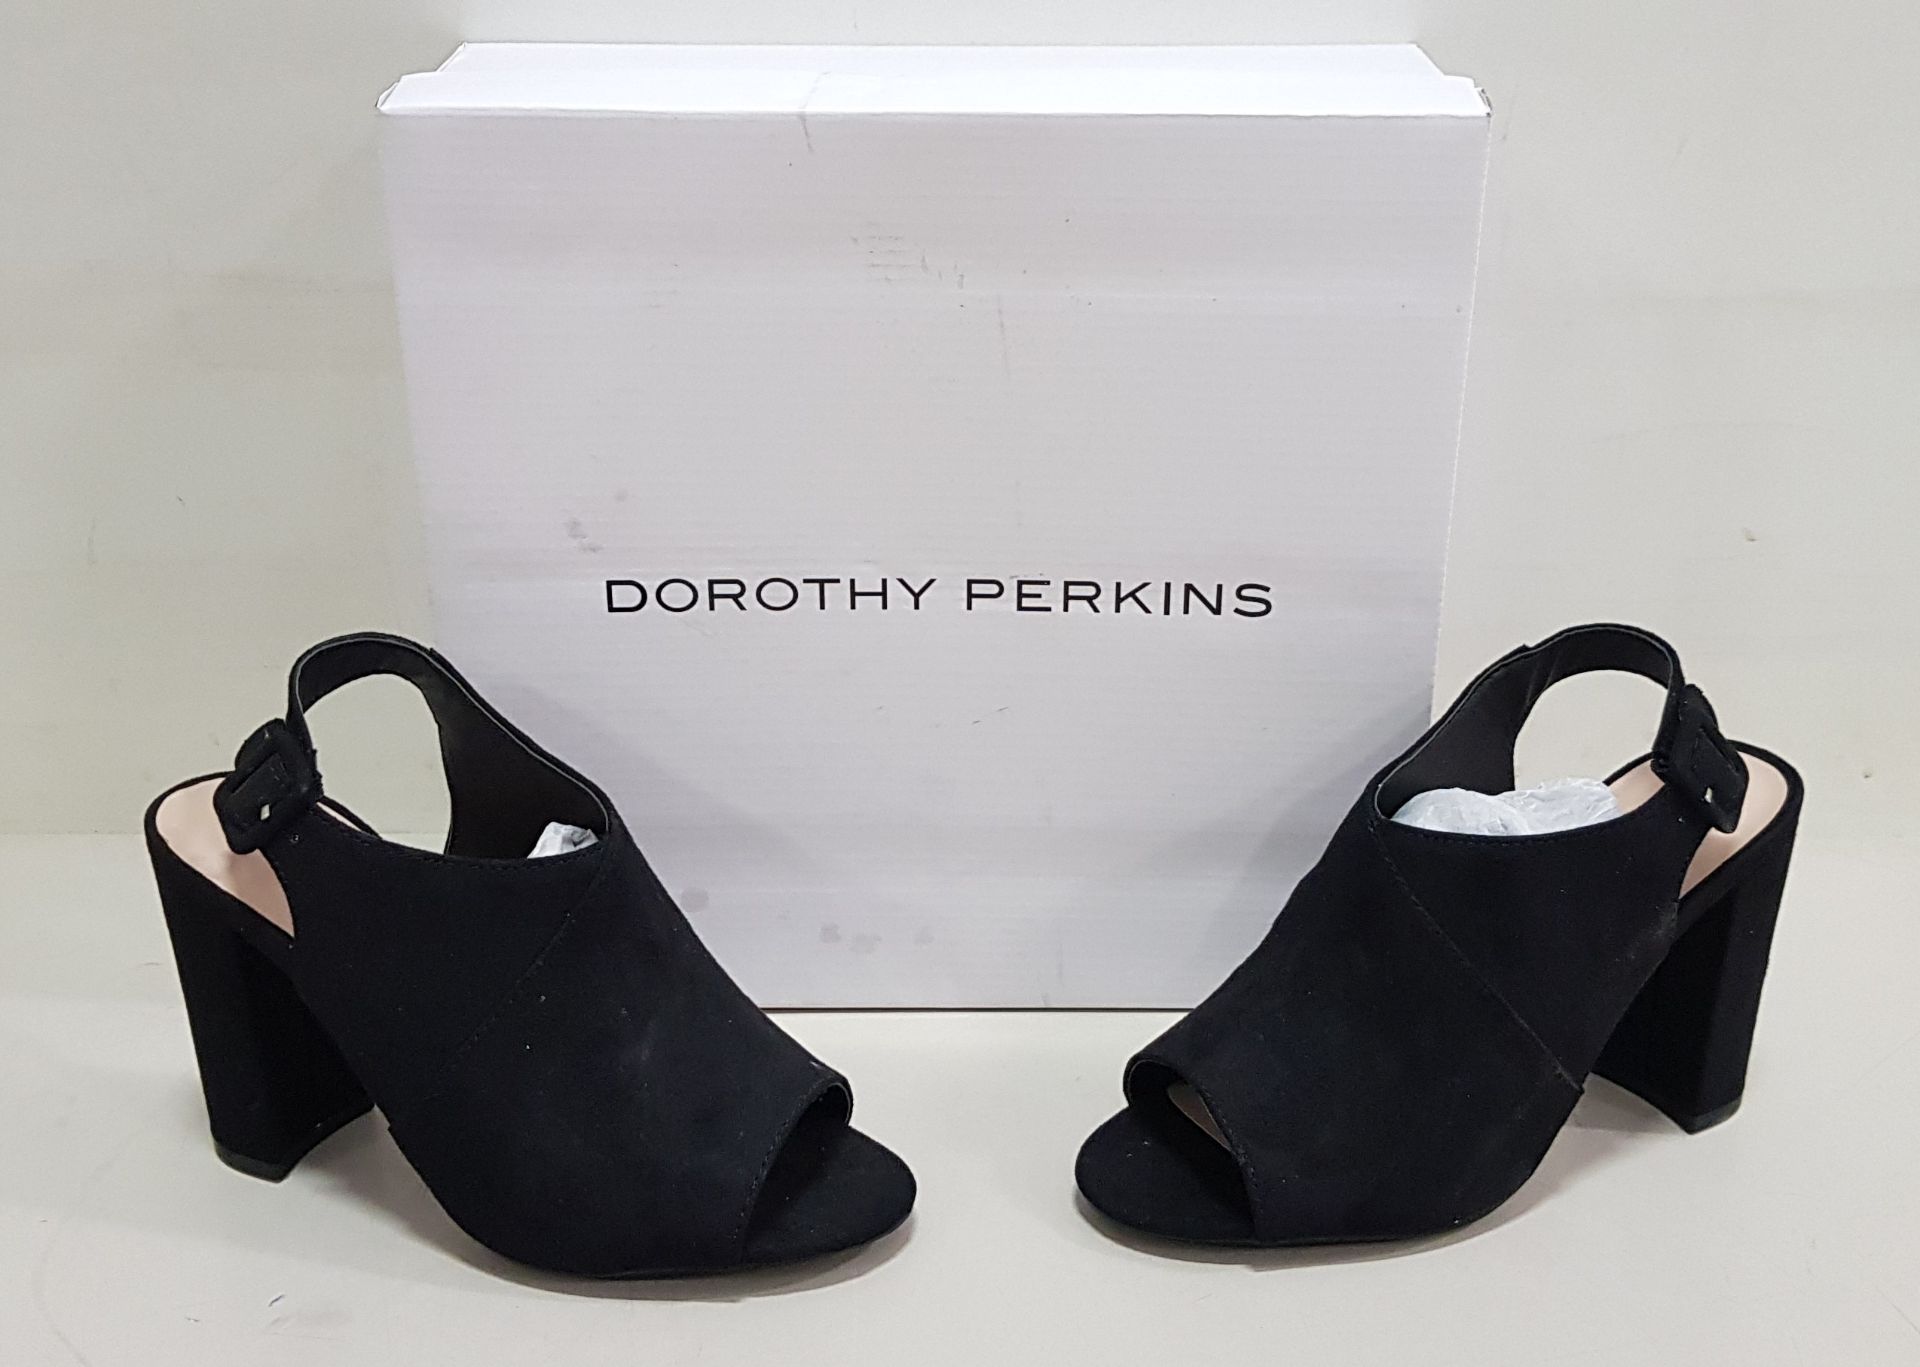 18 X BRAND NEW DOROTHY PERKINS BLACK SAVO HEELED SANDALS - IN SIZE UK 3 RRP £28.00pp